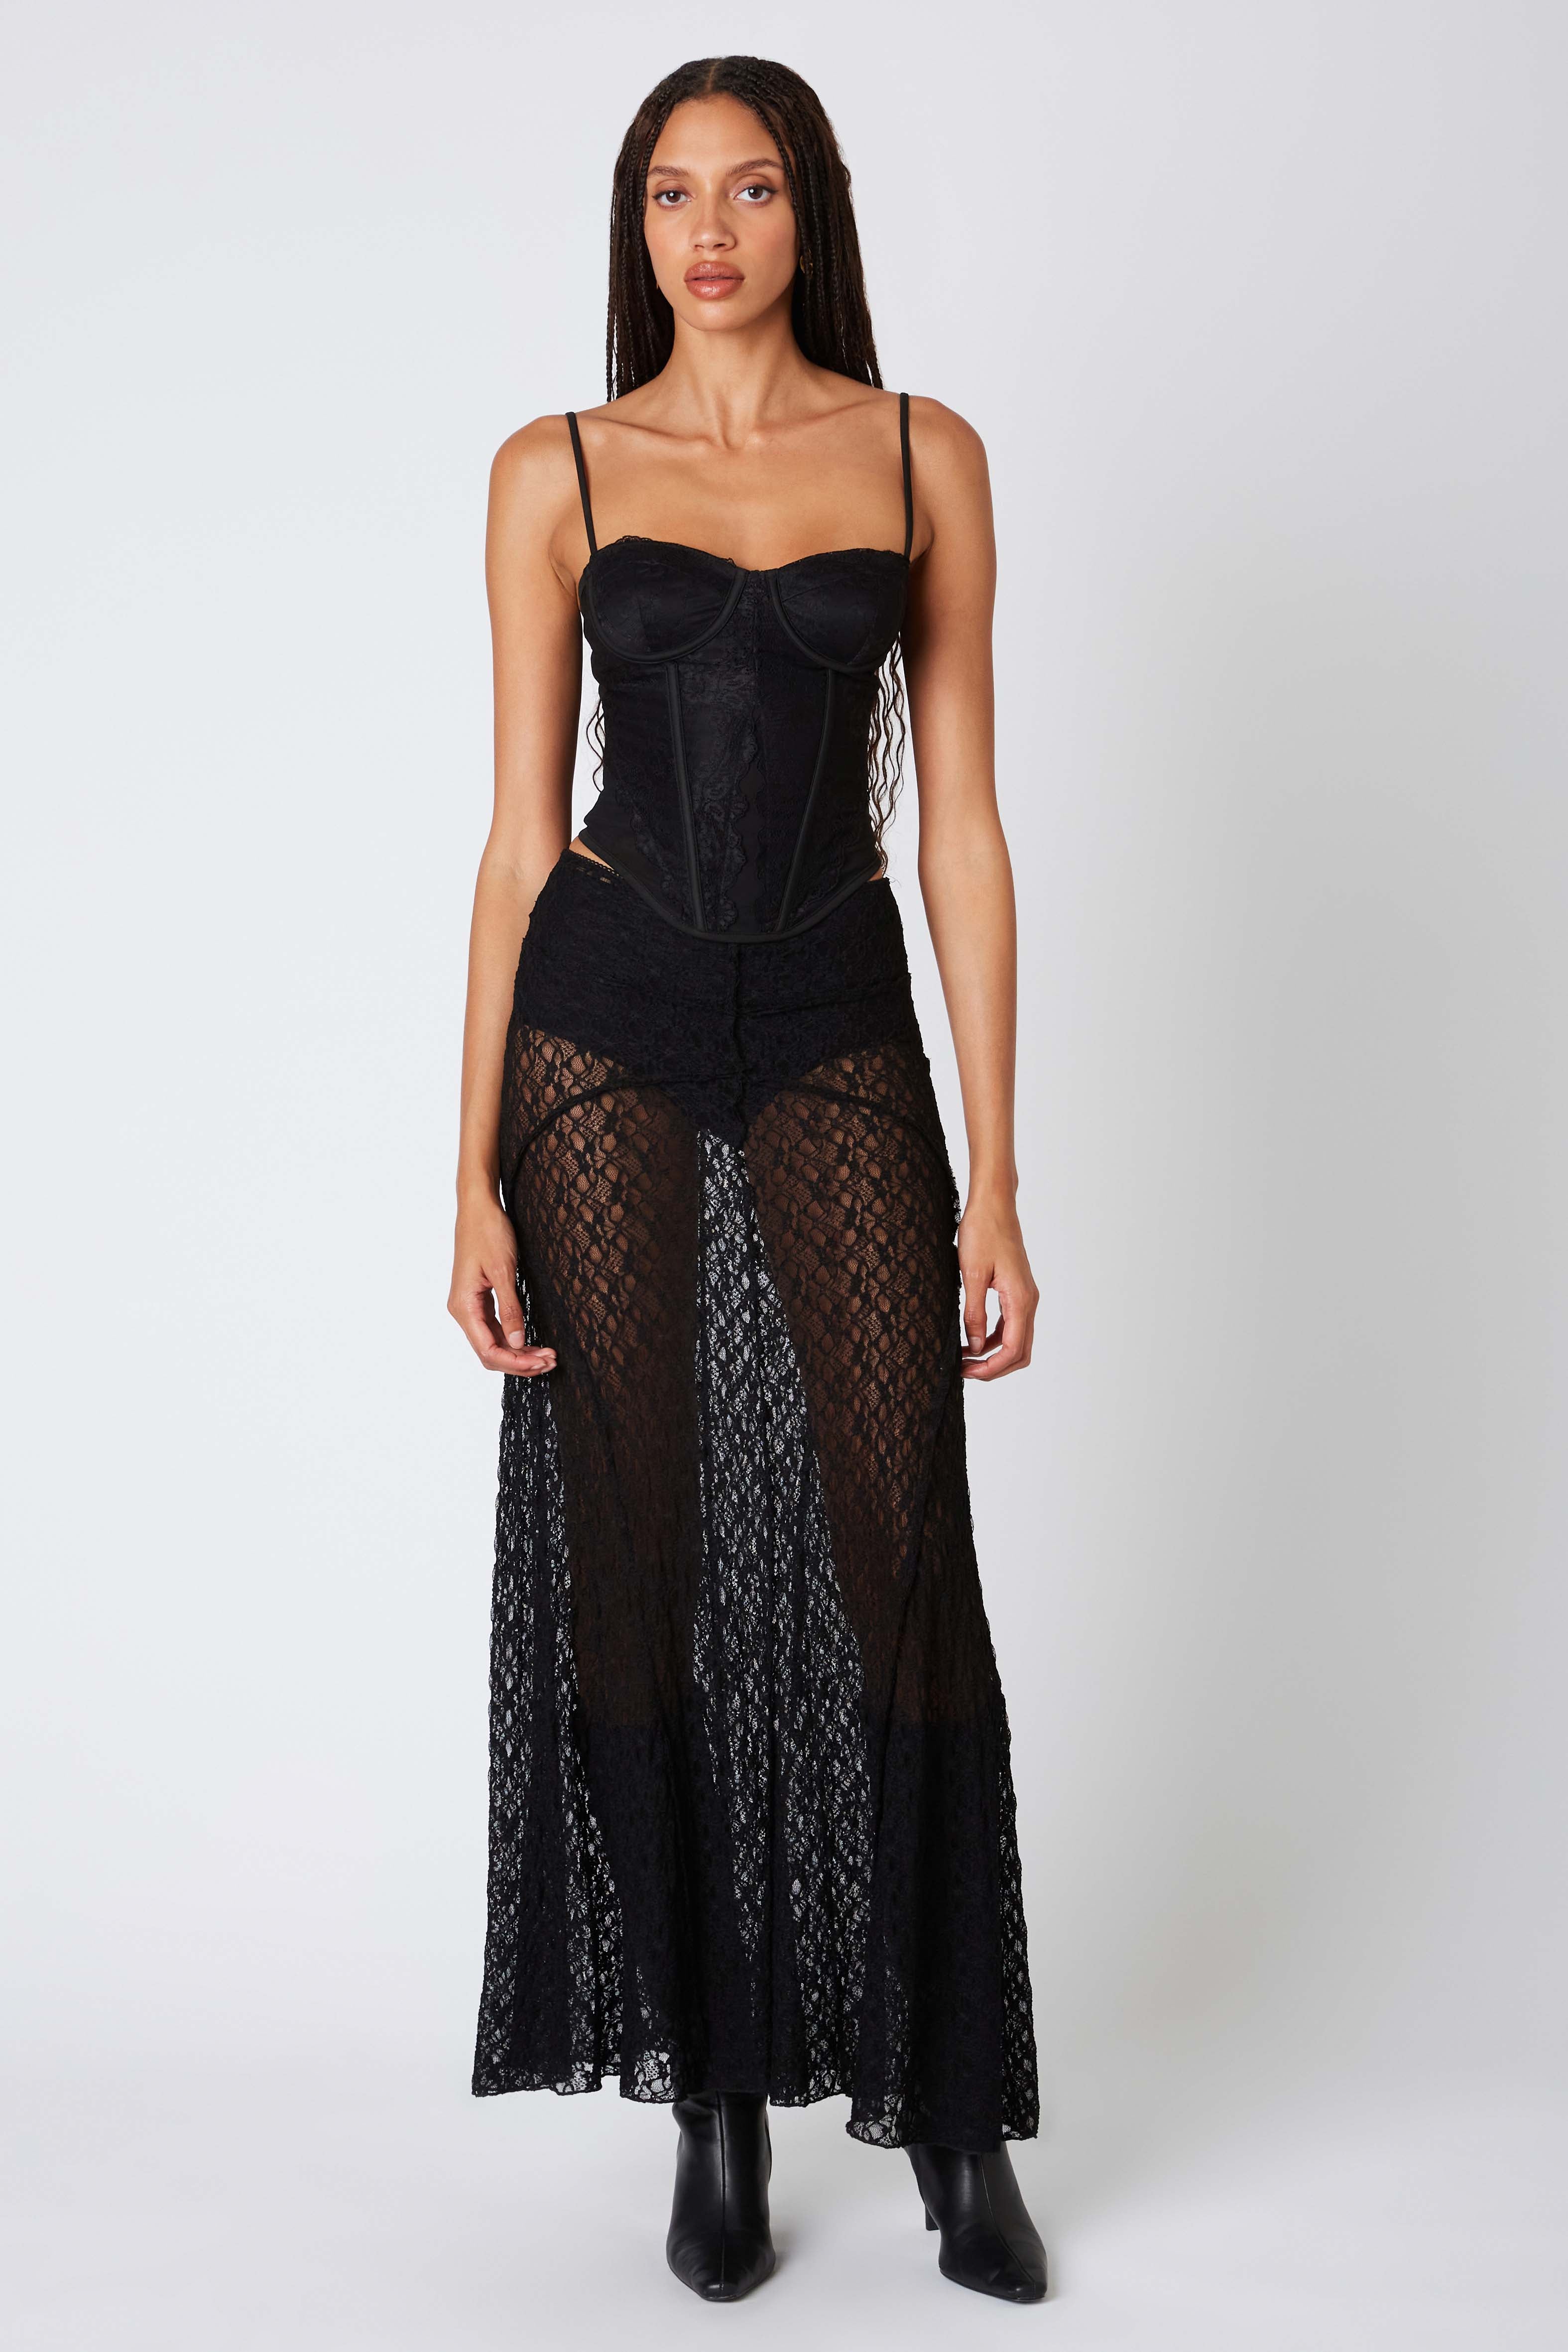 Sheer Lace Maxi Skirt in Black Front View